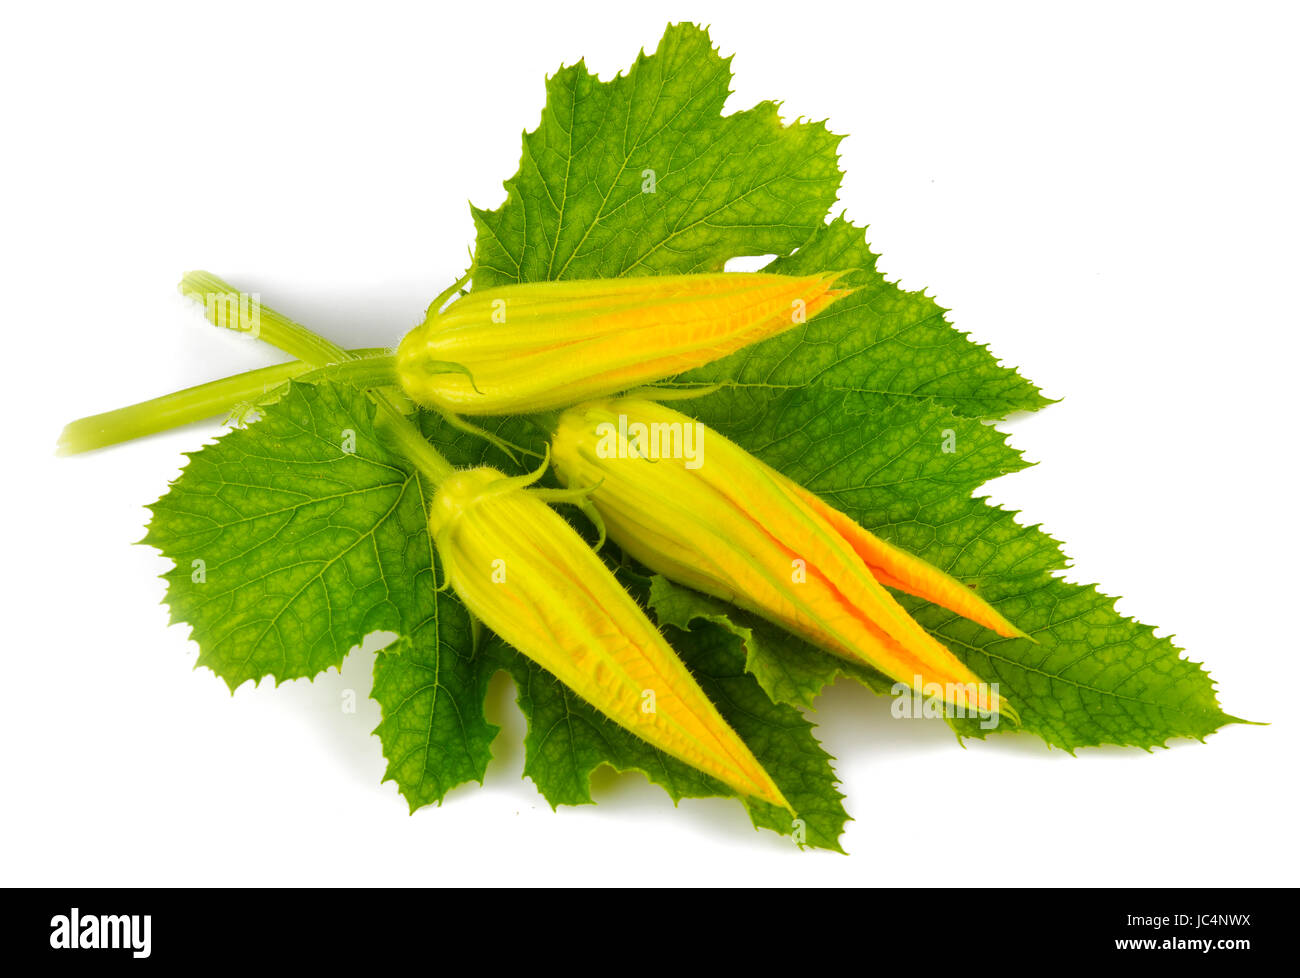 Pumpkin blossom and green leaf isolated on white background Stock Photo